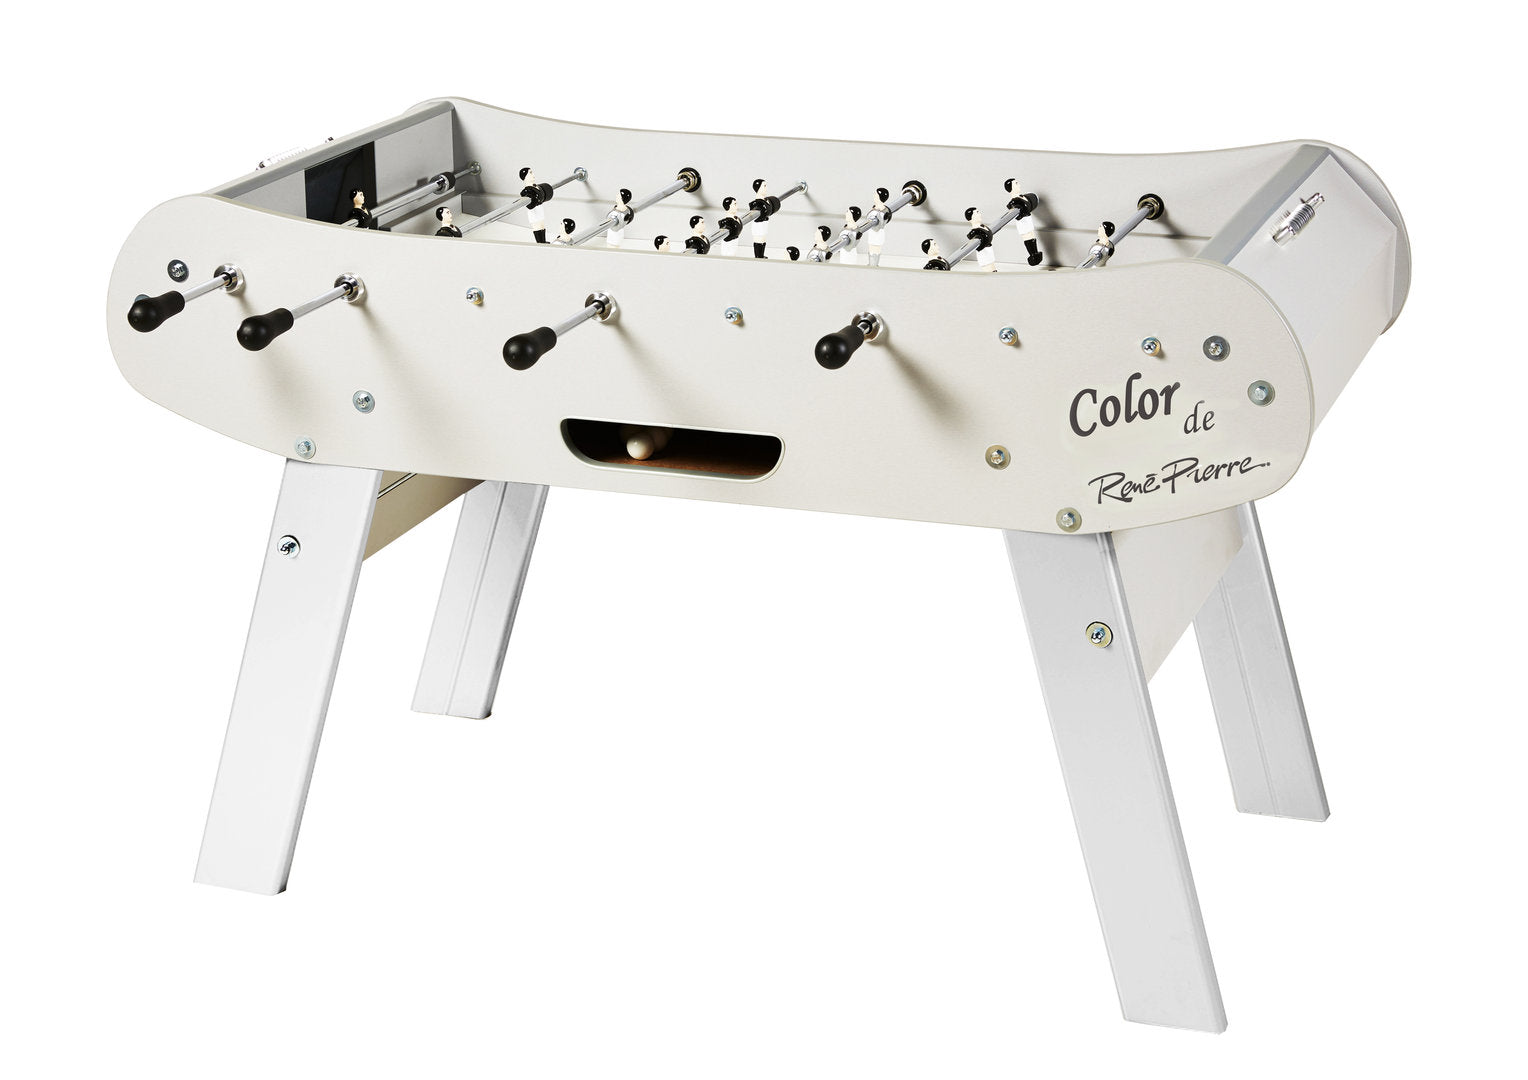  Picture of Rene Pierre Color Blanc (White) Foosball Table